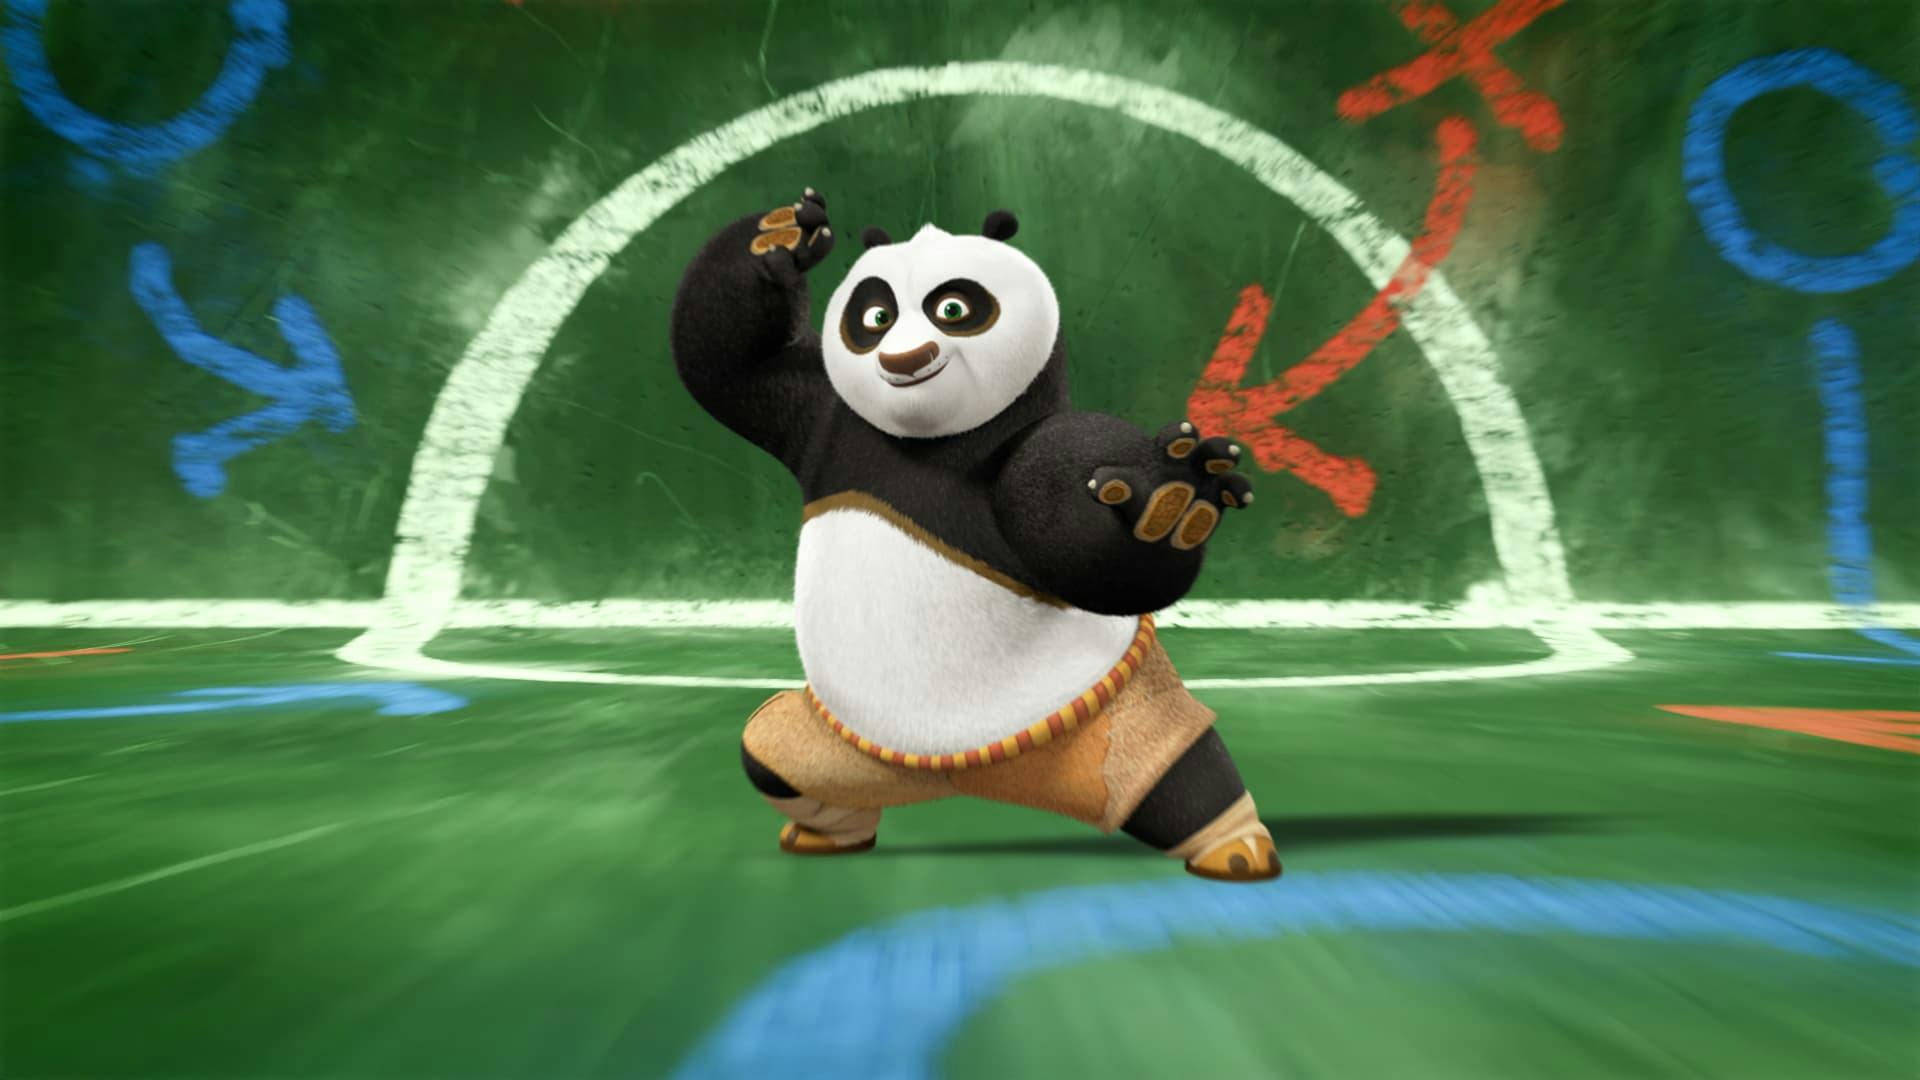 Po from DreamWorks Kung Fu Panda stands in a martial arts pose. He is stood on a giant chalk board environment similar to one that might be used in working out soccer tactics.